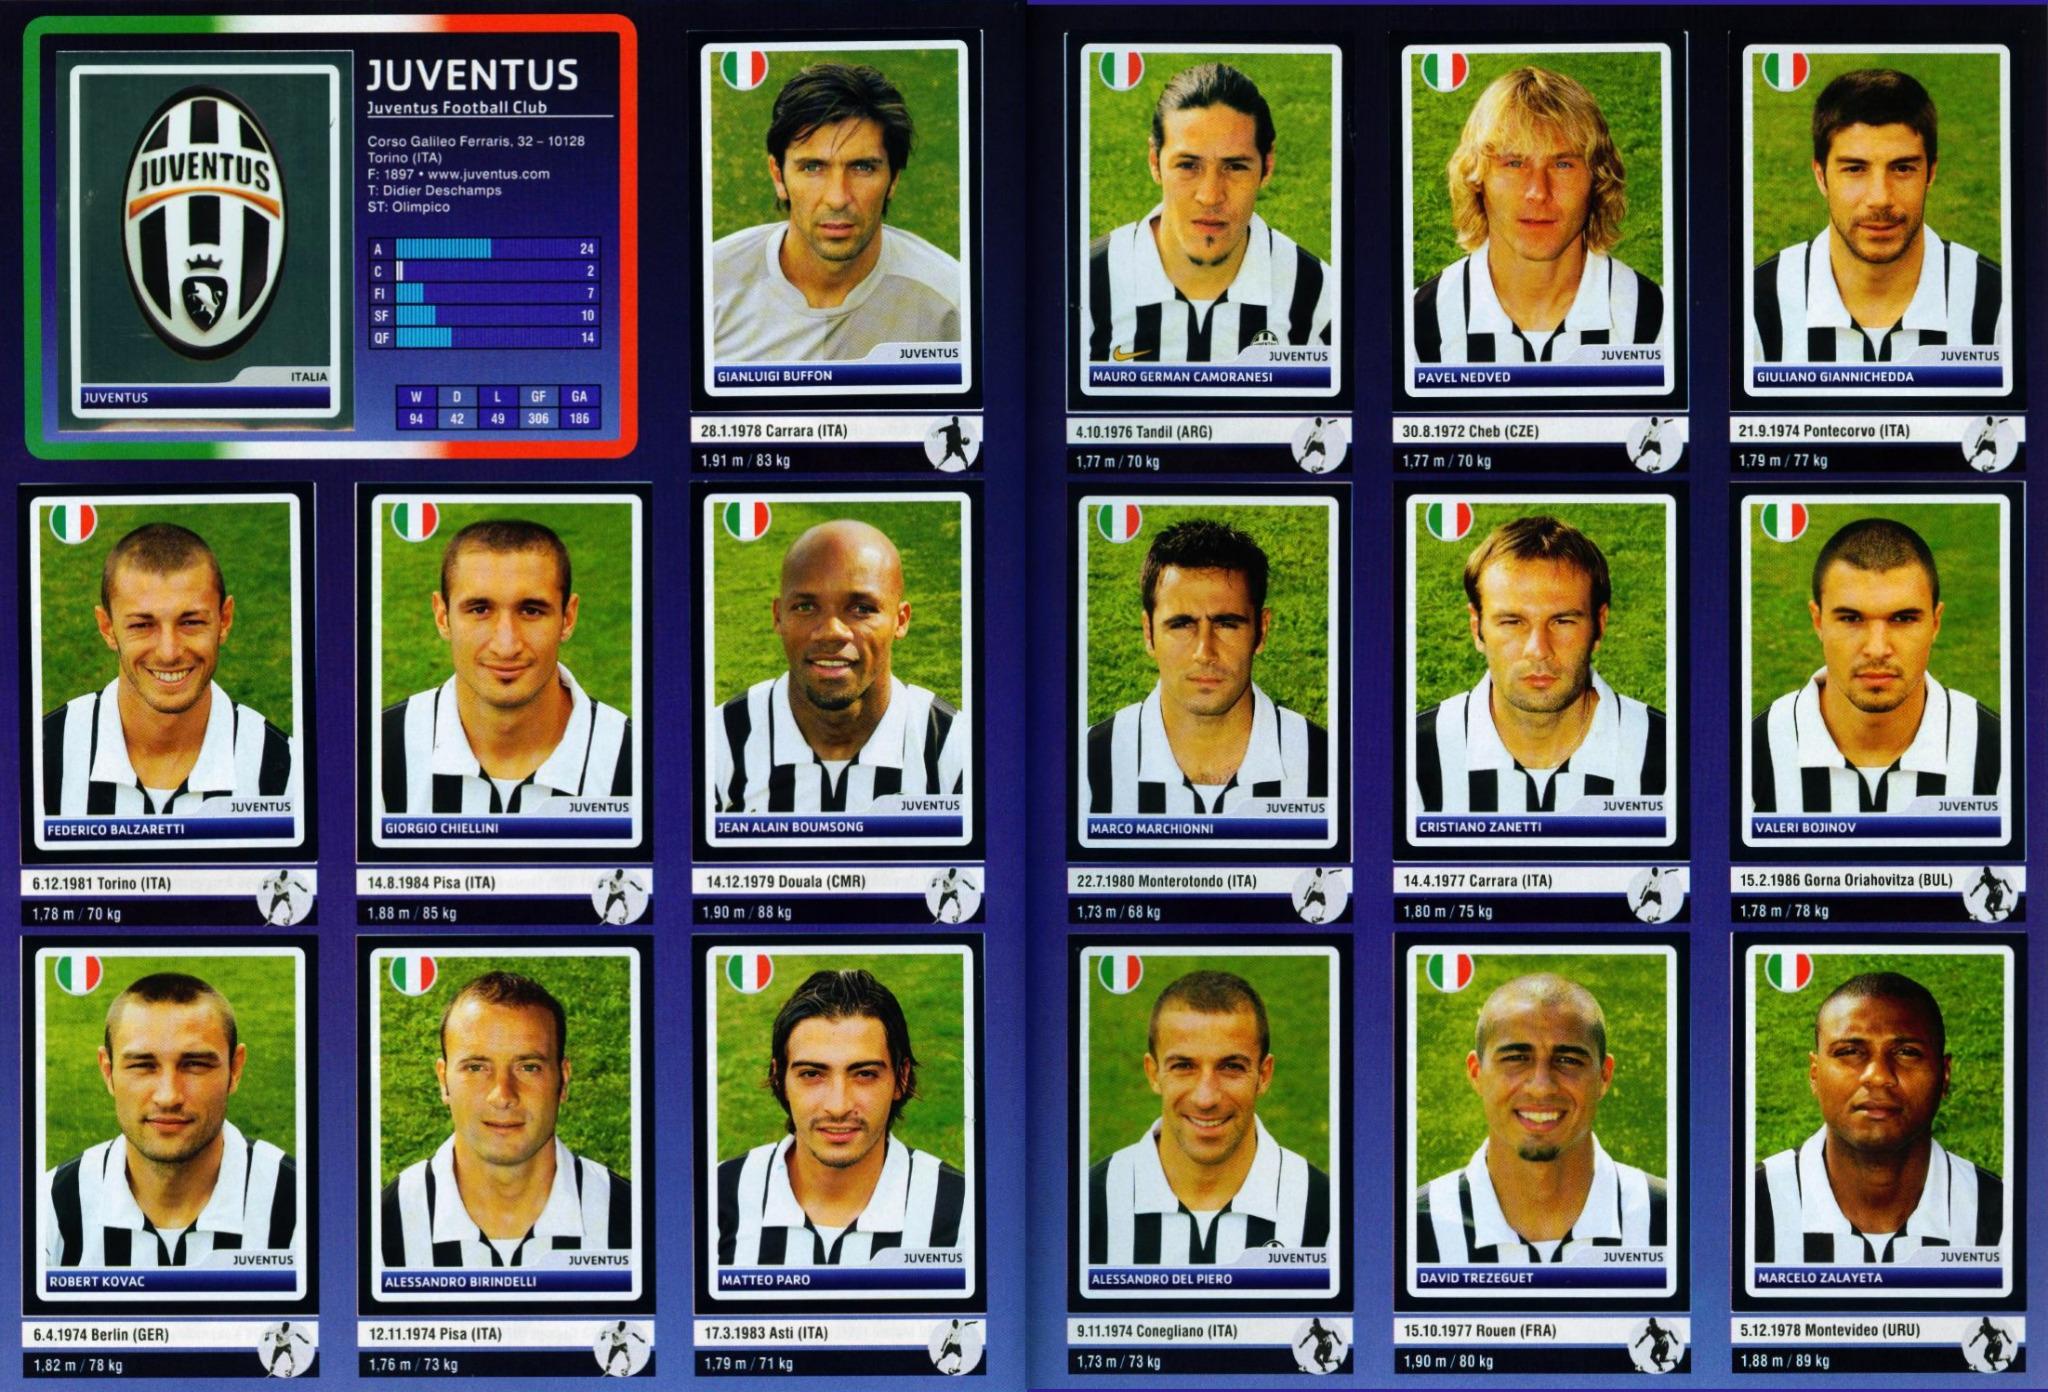 Old School Panini on Twitter: "JUVENTUS FC 2006-07. What a team for Serie B  !! (Italian second division) http://t.co/qxdkJSQ0UB" / Twitter